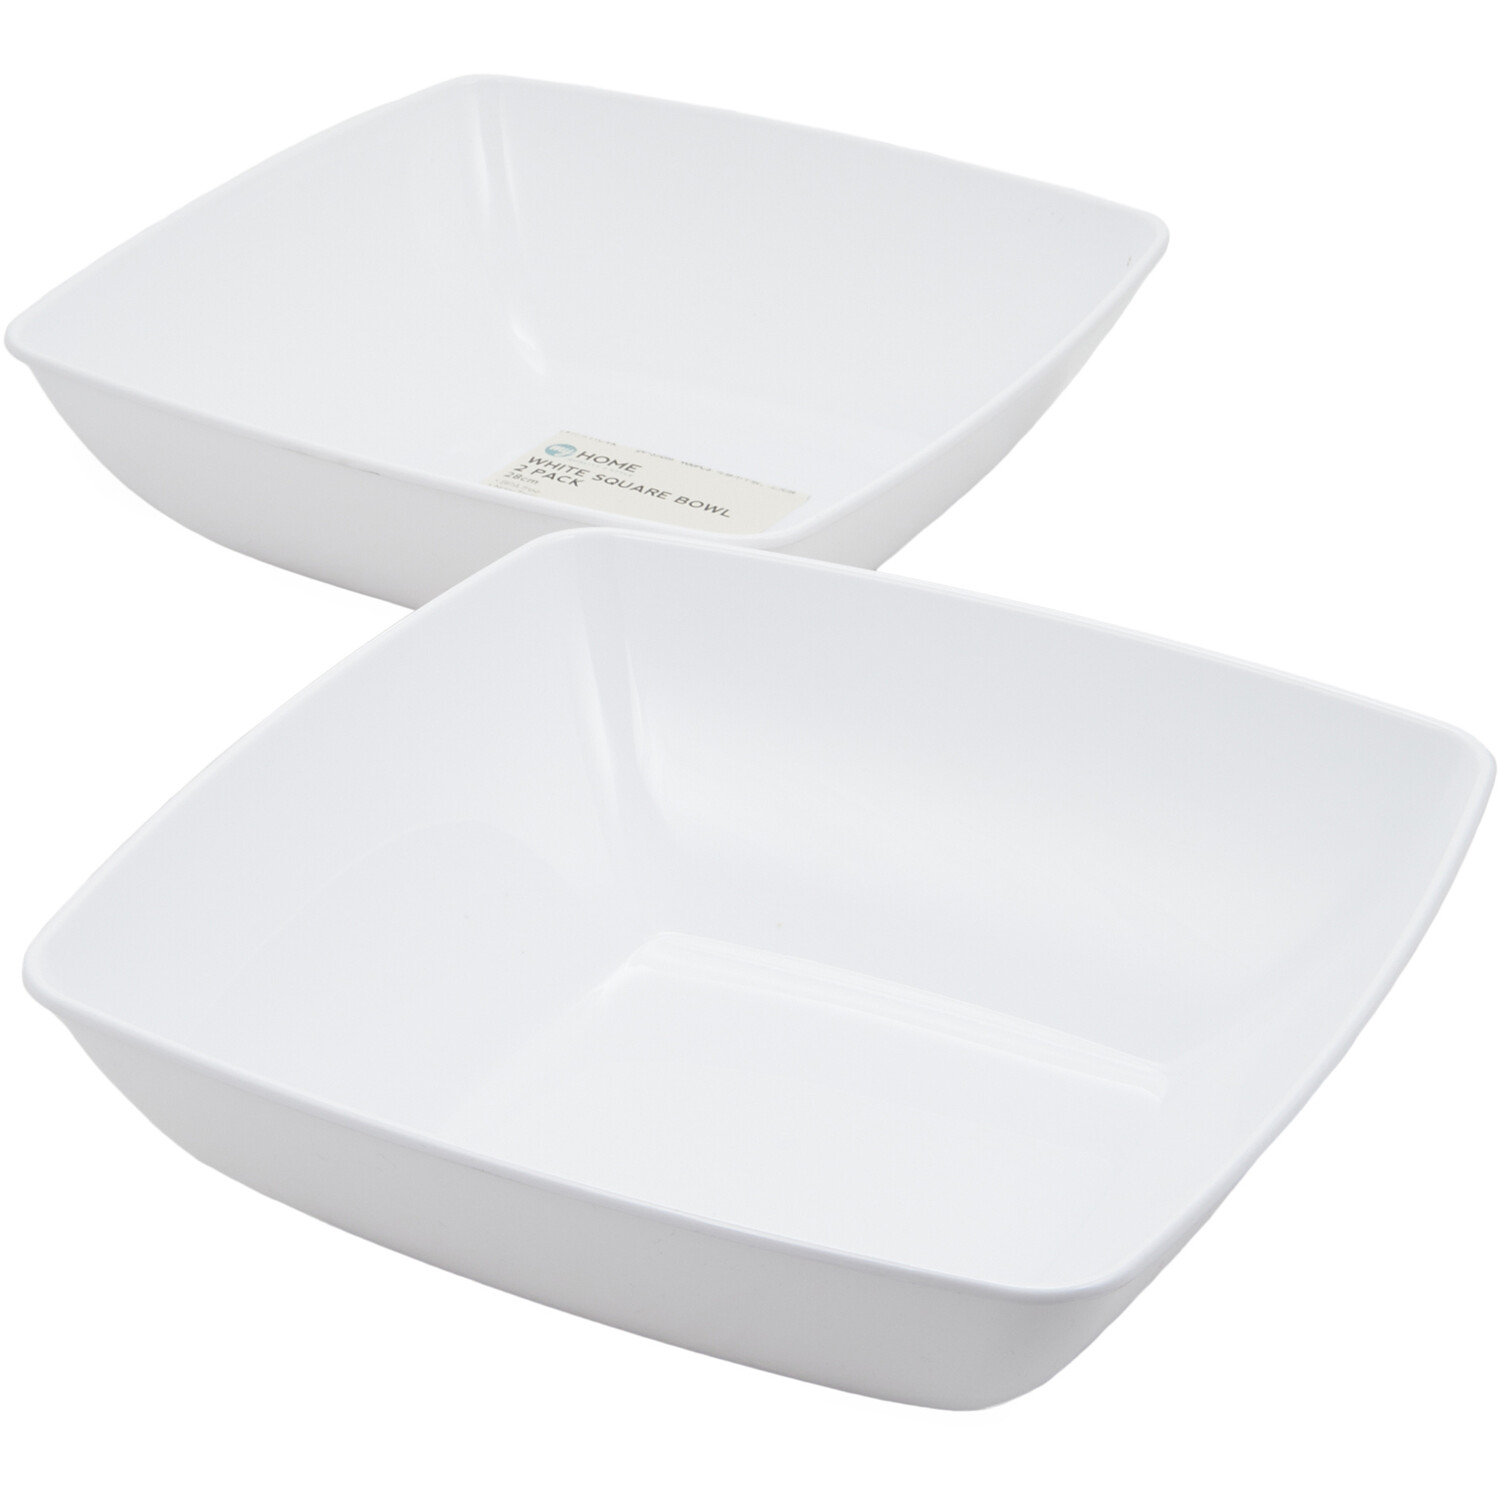 Pack of 2 My Home Square Bowls - White Image 3